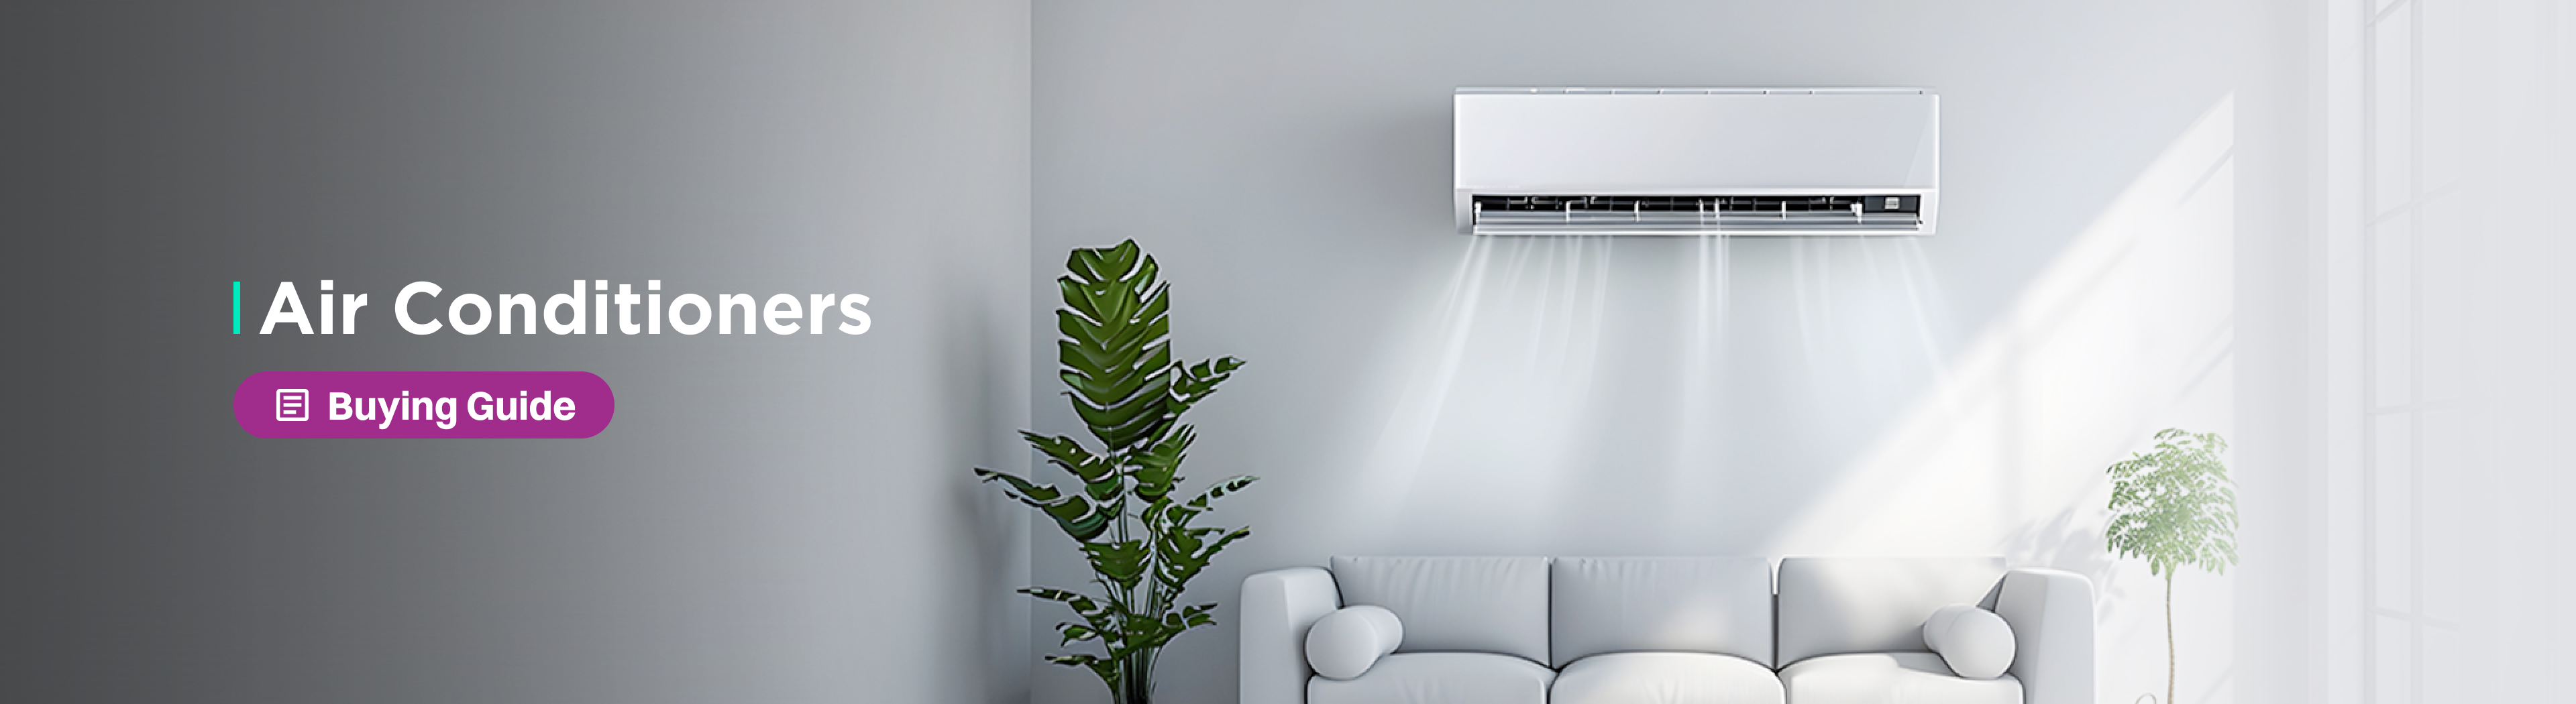 Air Conditioners Buying Guide | Croma